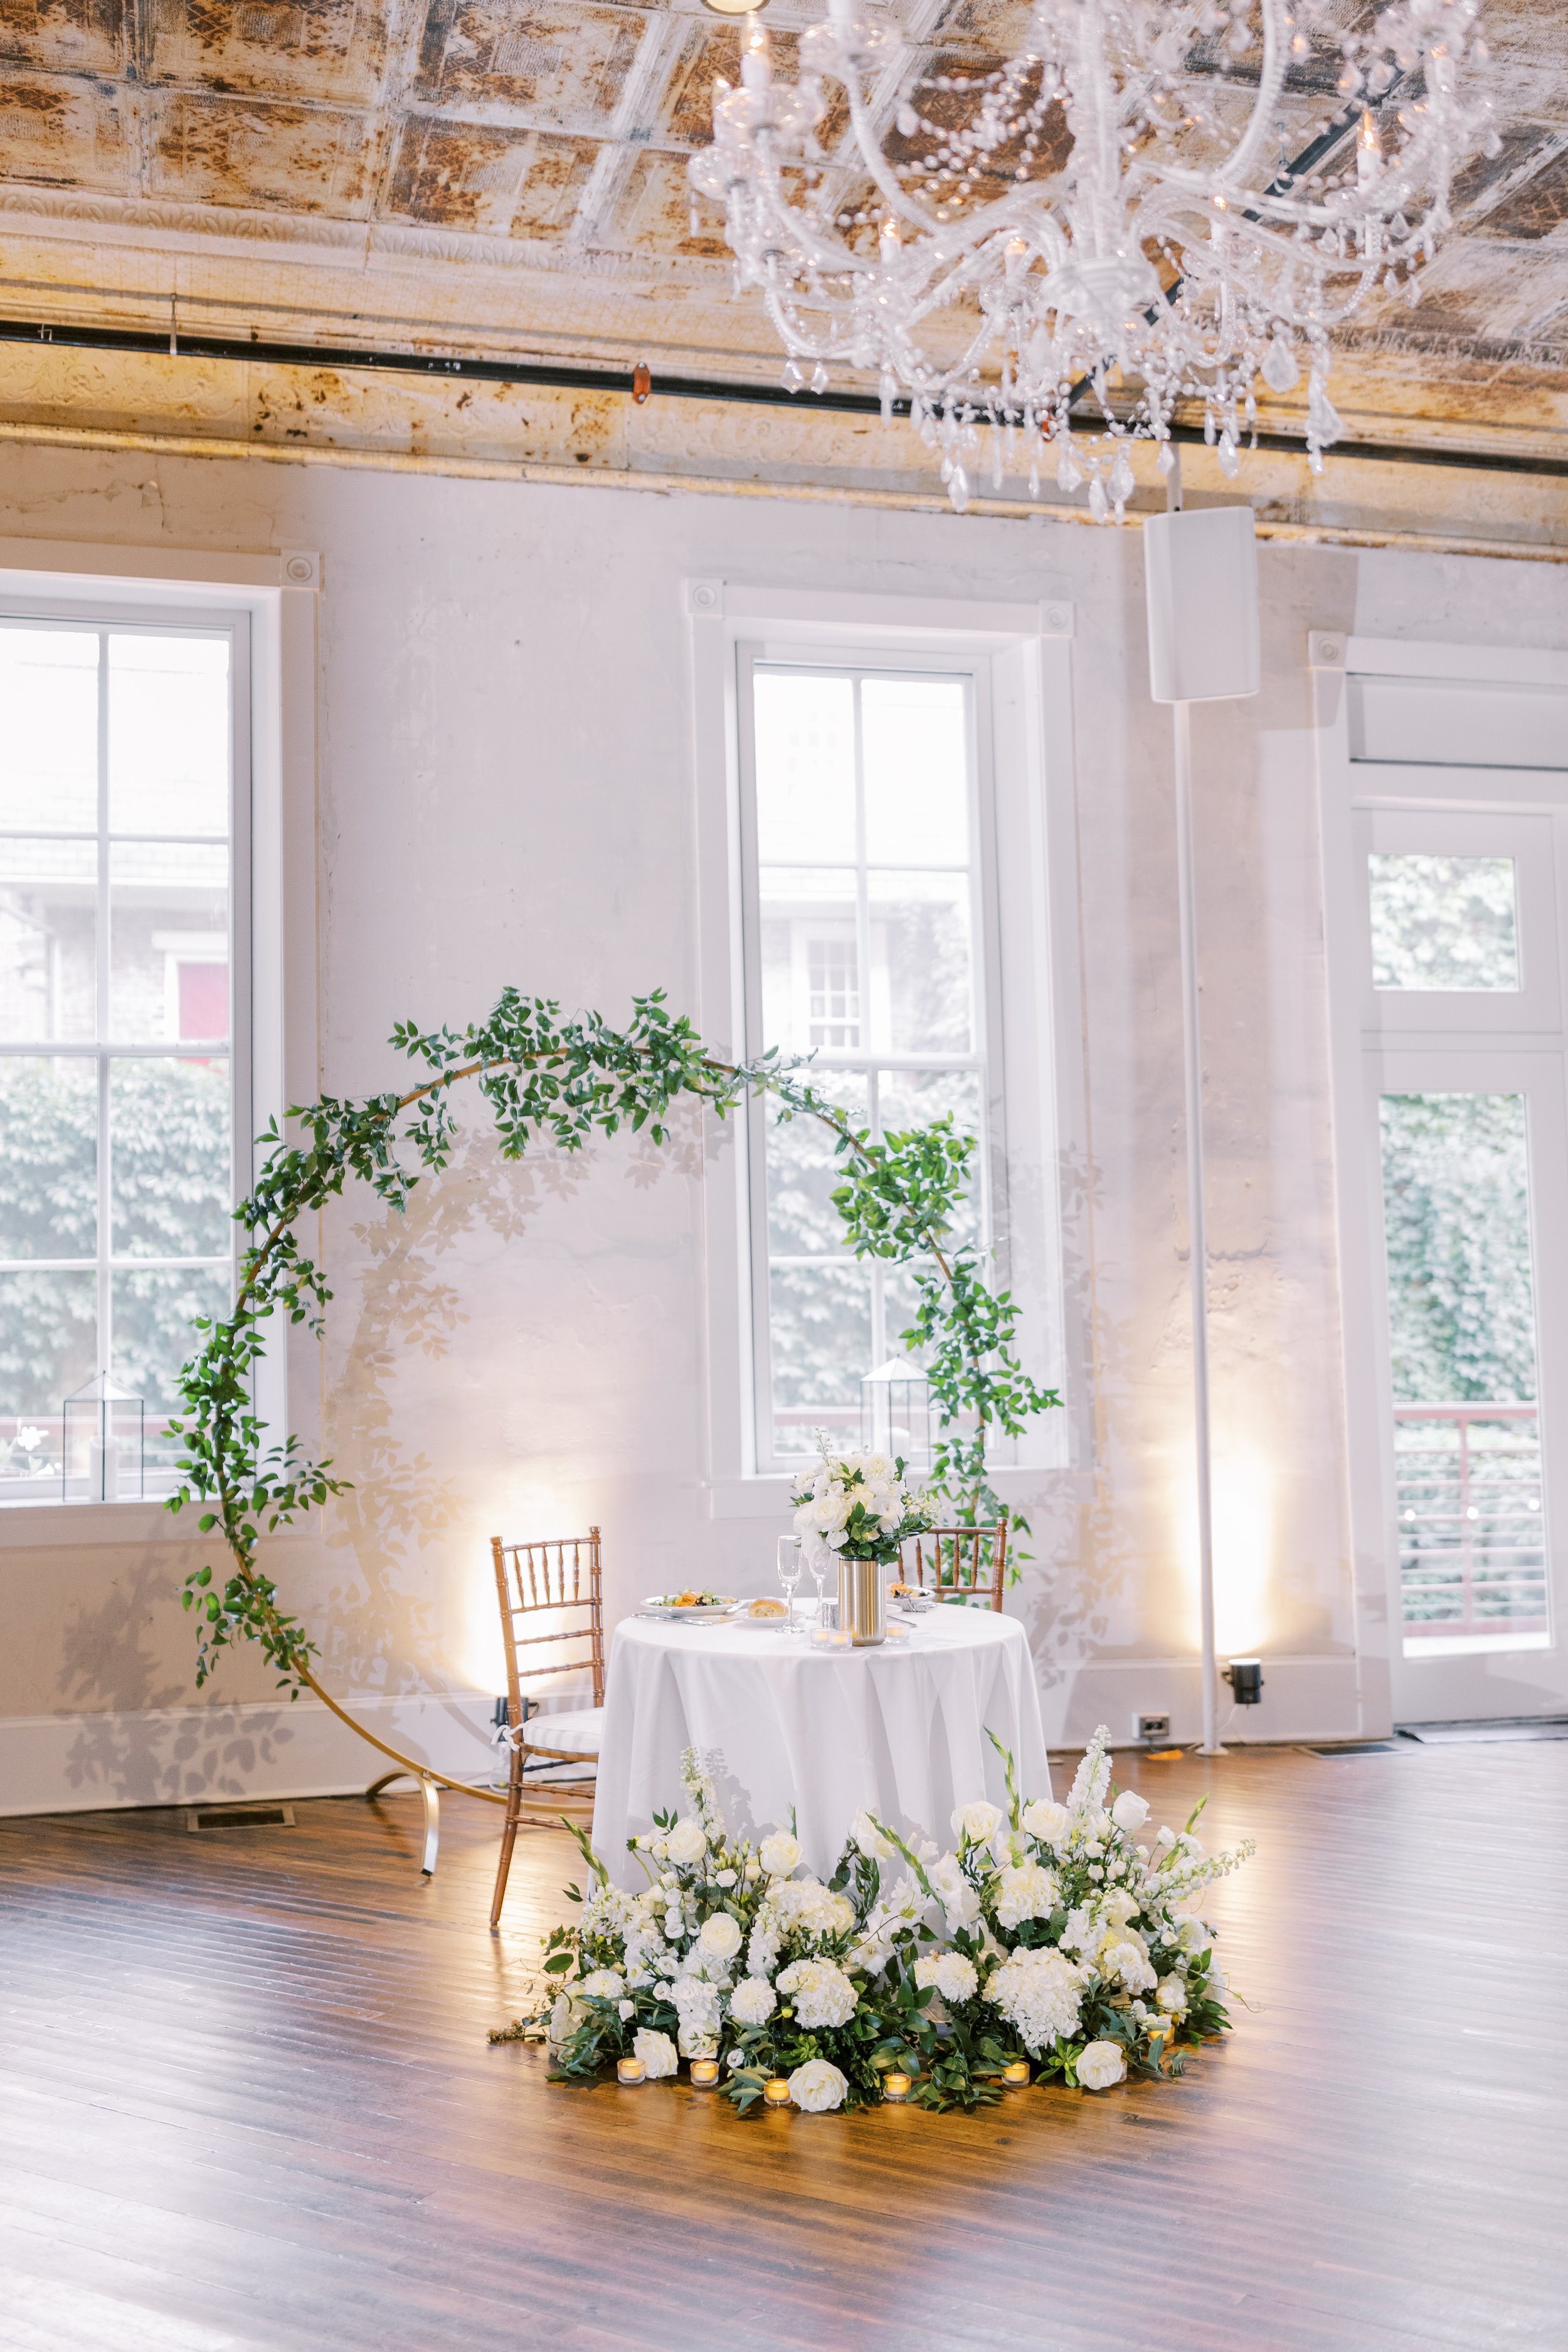 Sweetheart table with piles of roses and large greenery circle display behind